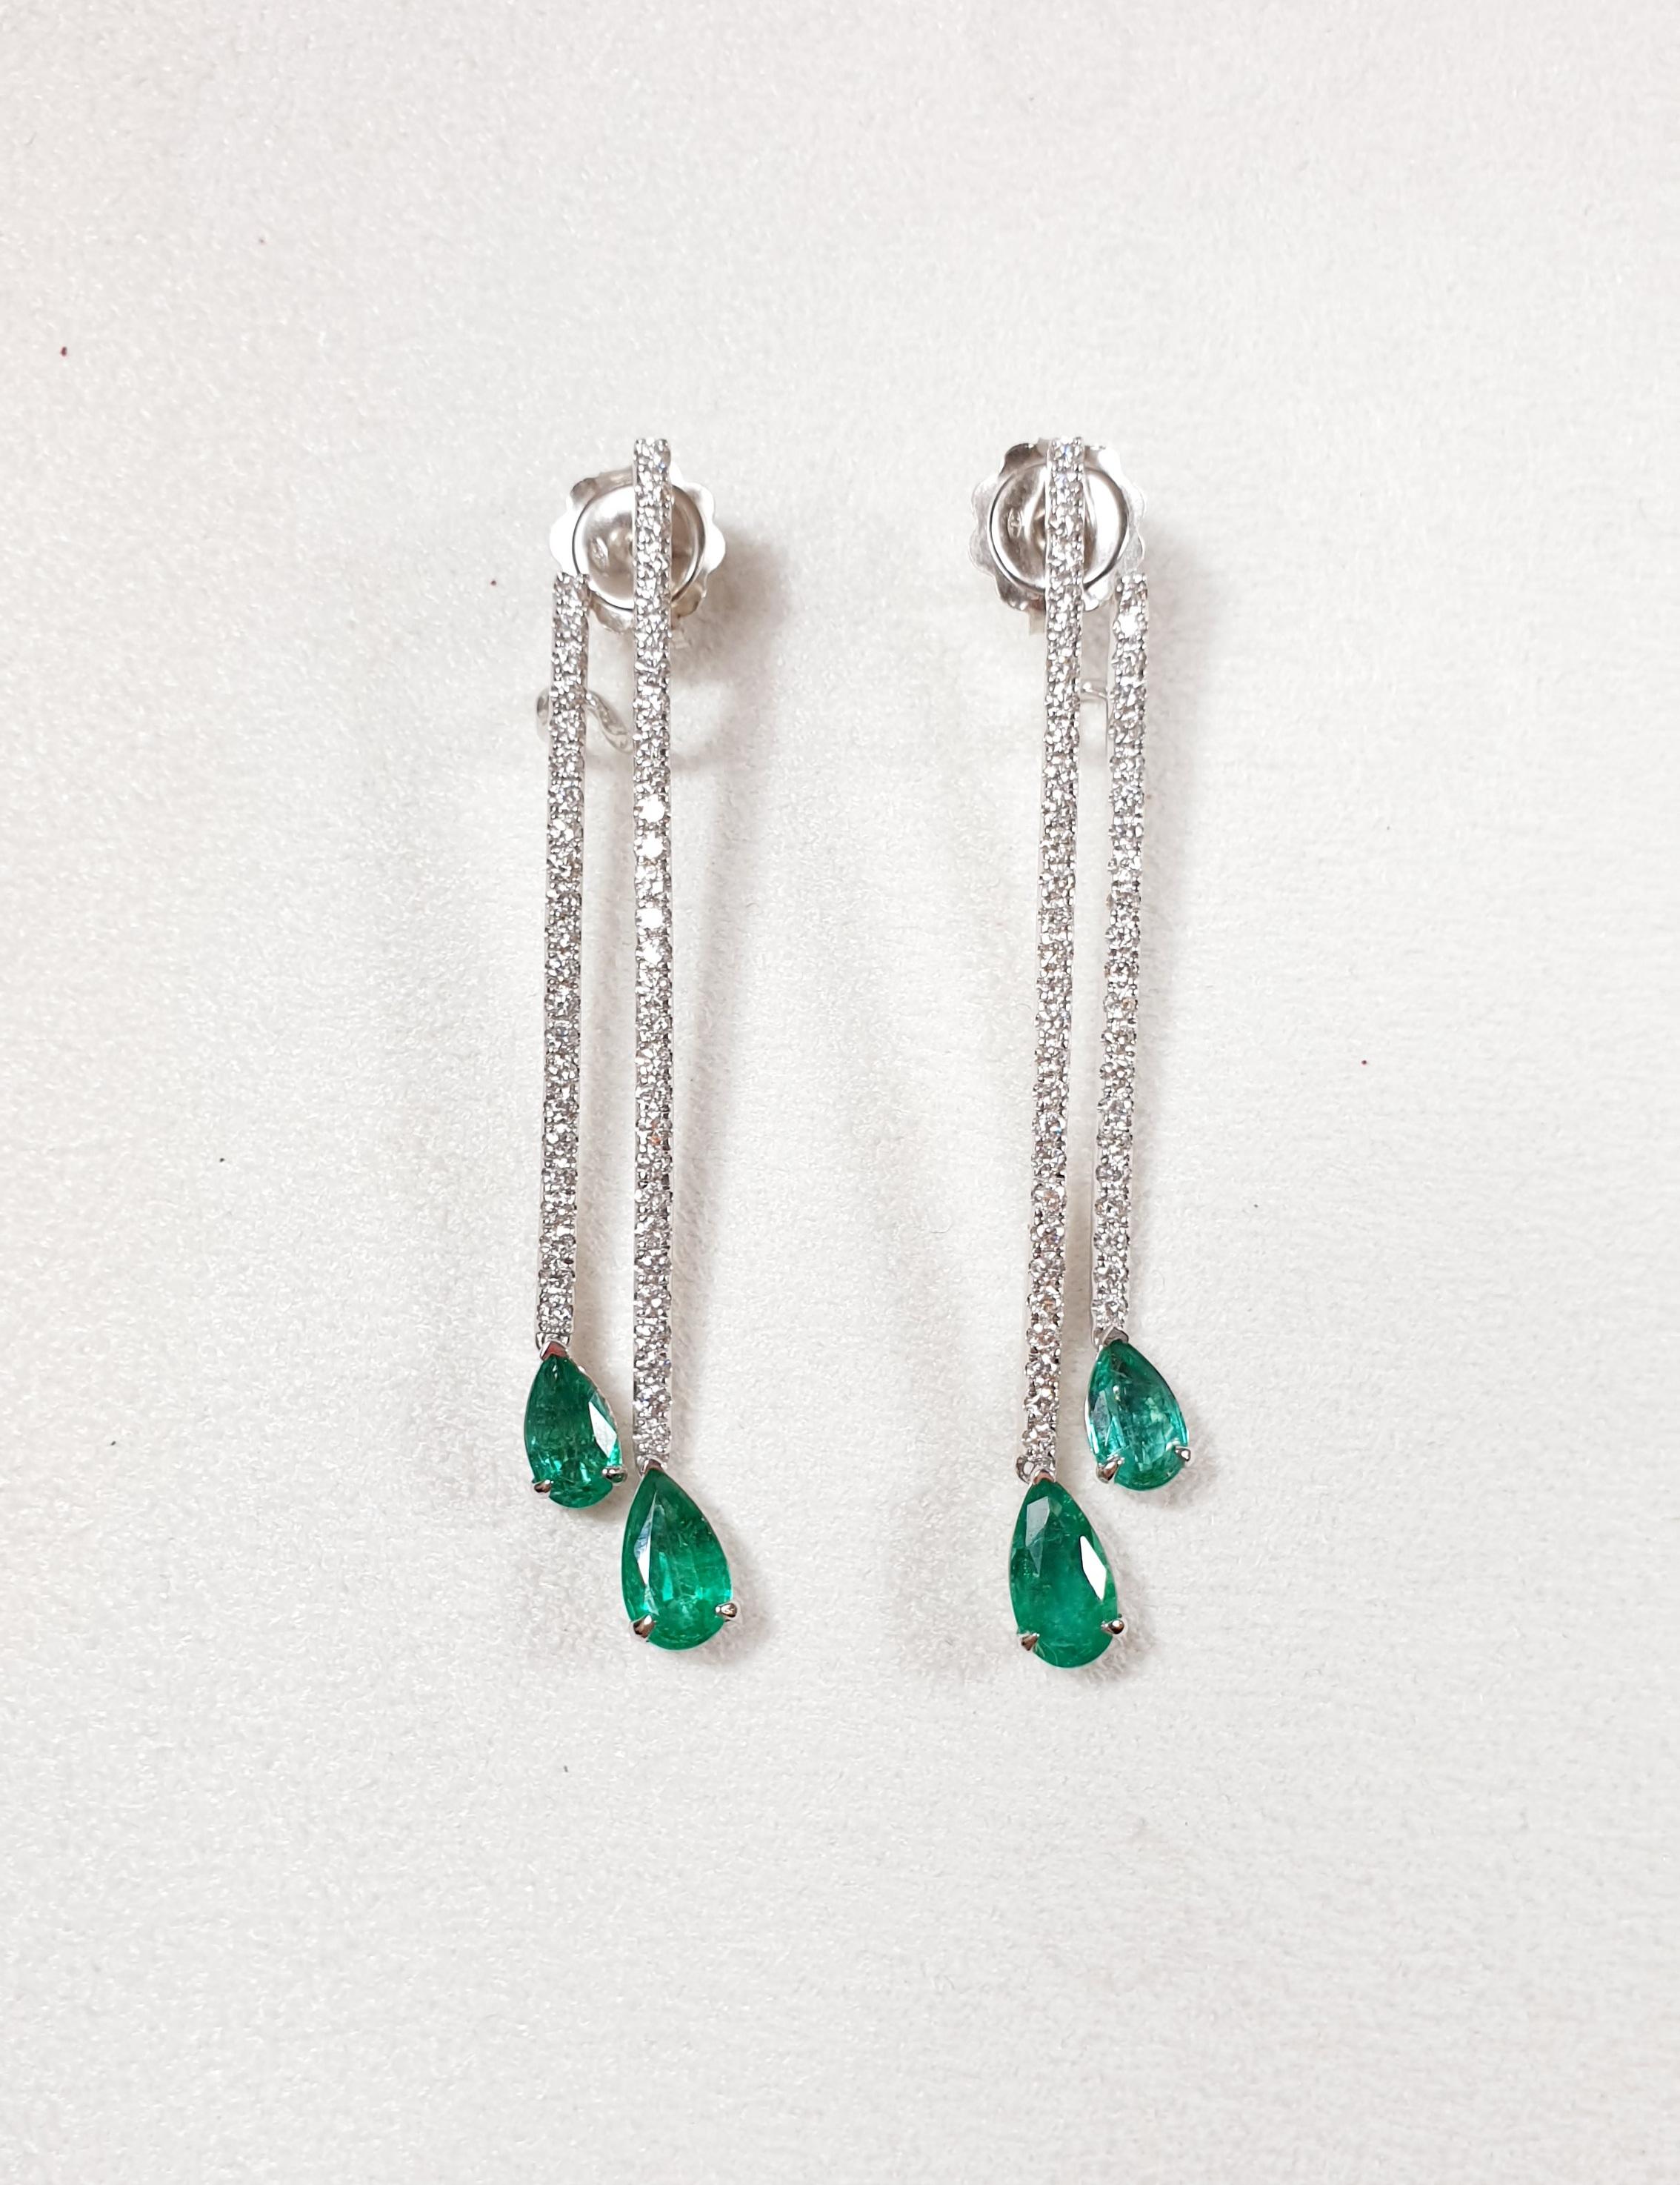 Colombian emerald 4 totaling 4.40ct ct earrings with diamonds and  white gold 
Irama Pradera is a Young designer from Spain that searches always for the best gems and combines classic with contemporary mounting and styles.
She creates many Jewels in